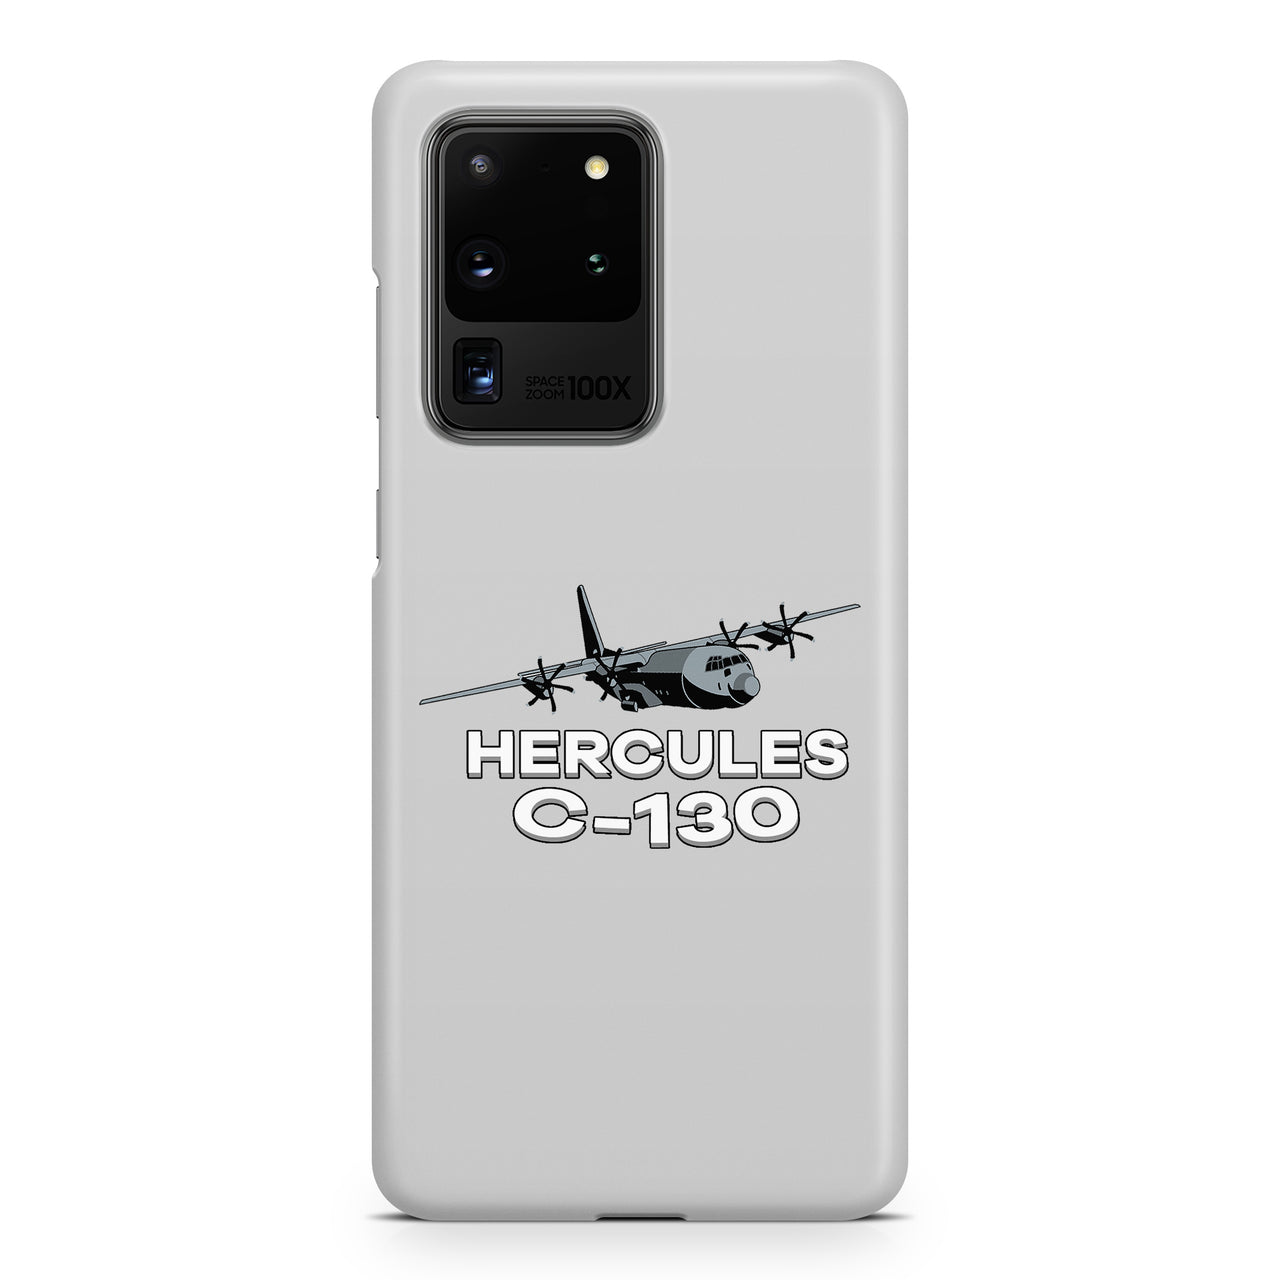 The Hercules C130 Samsung A Cases